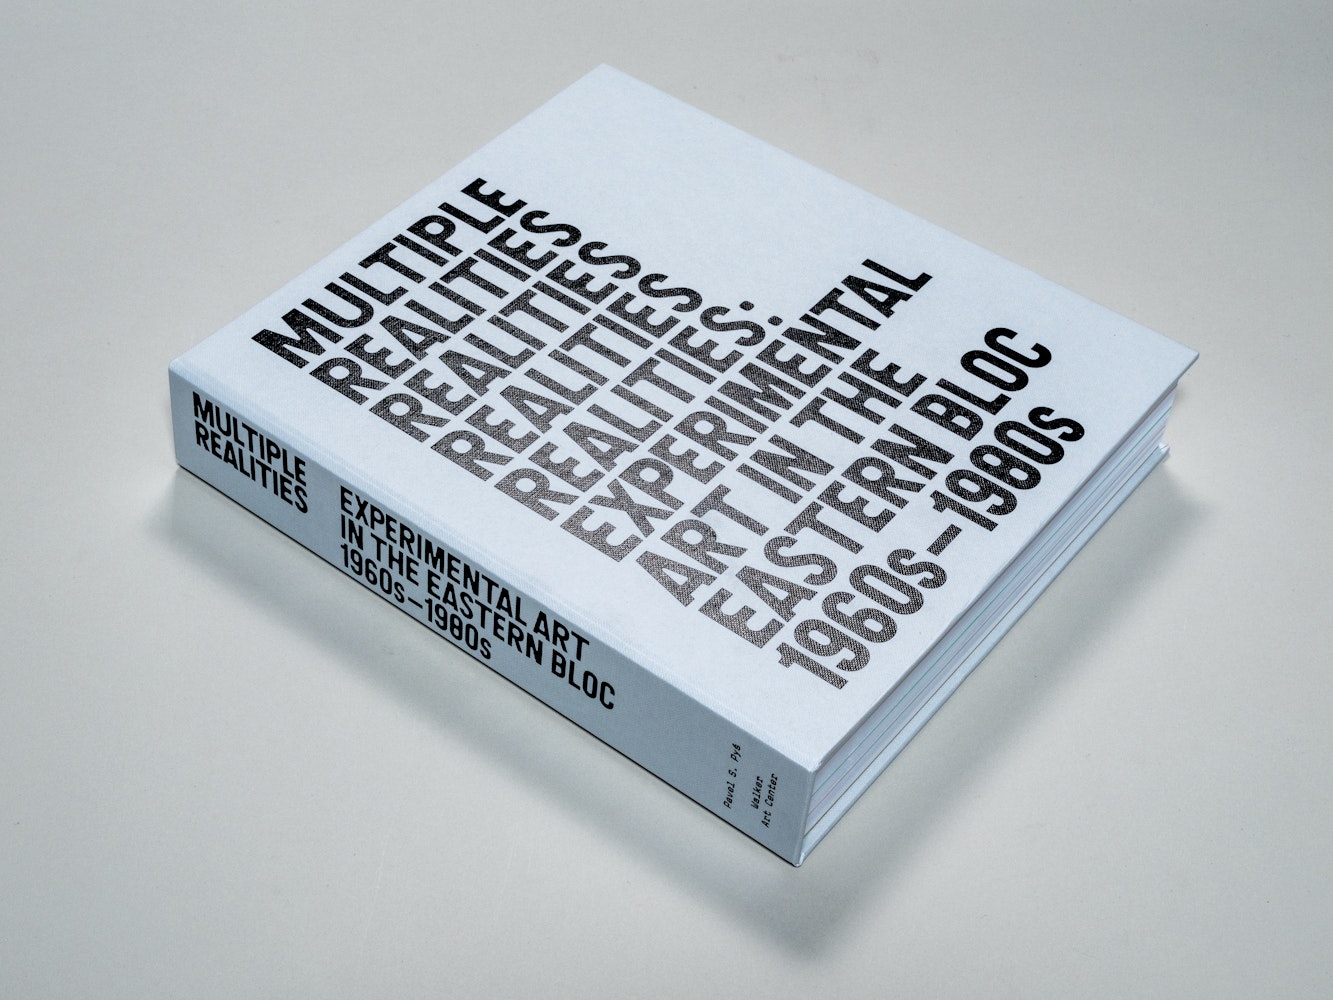 Cover of a book with the title "Multiple Realities: Experimental Art in the Eastern Bloc 1960s–1980s"